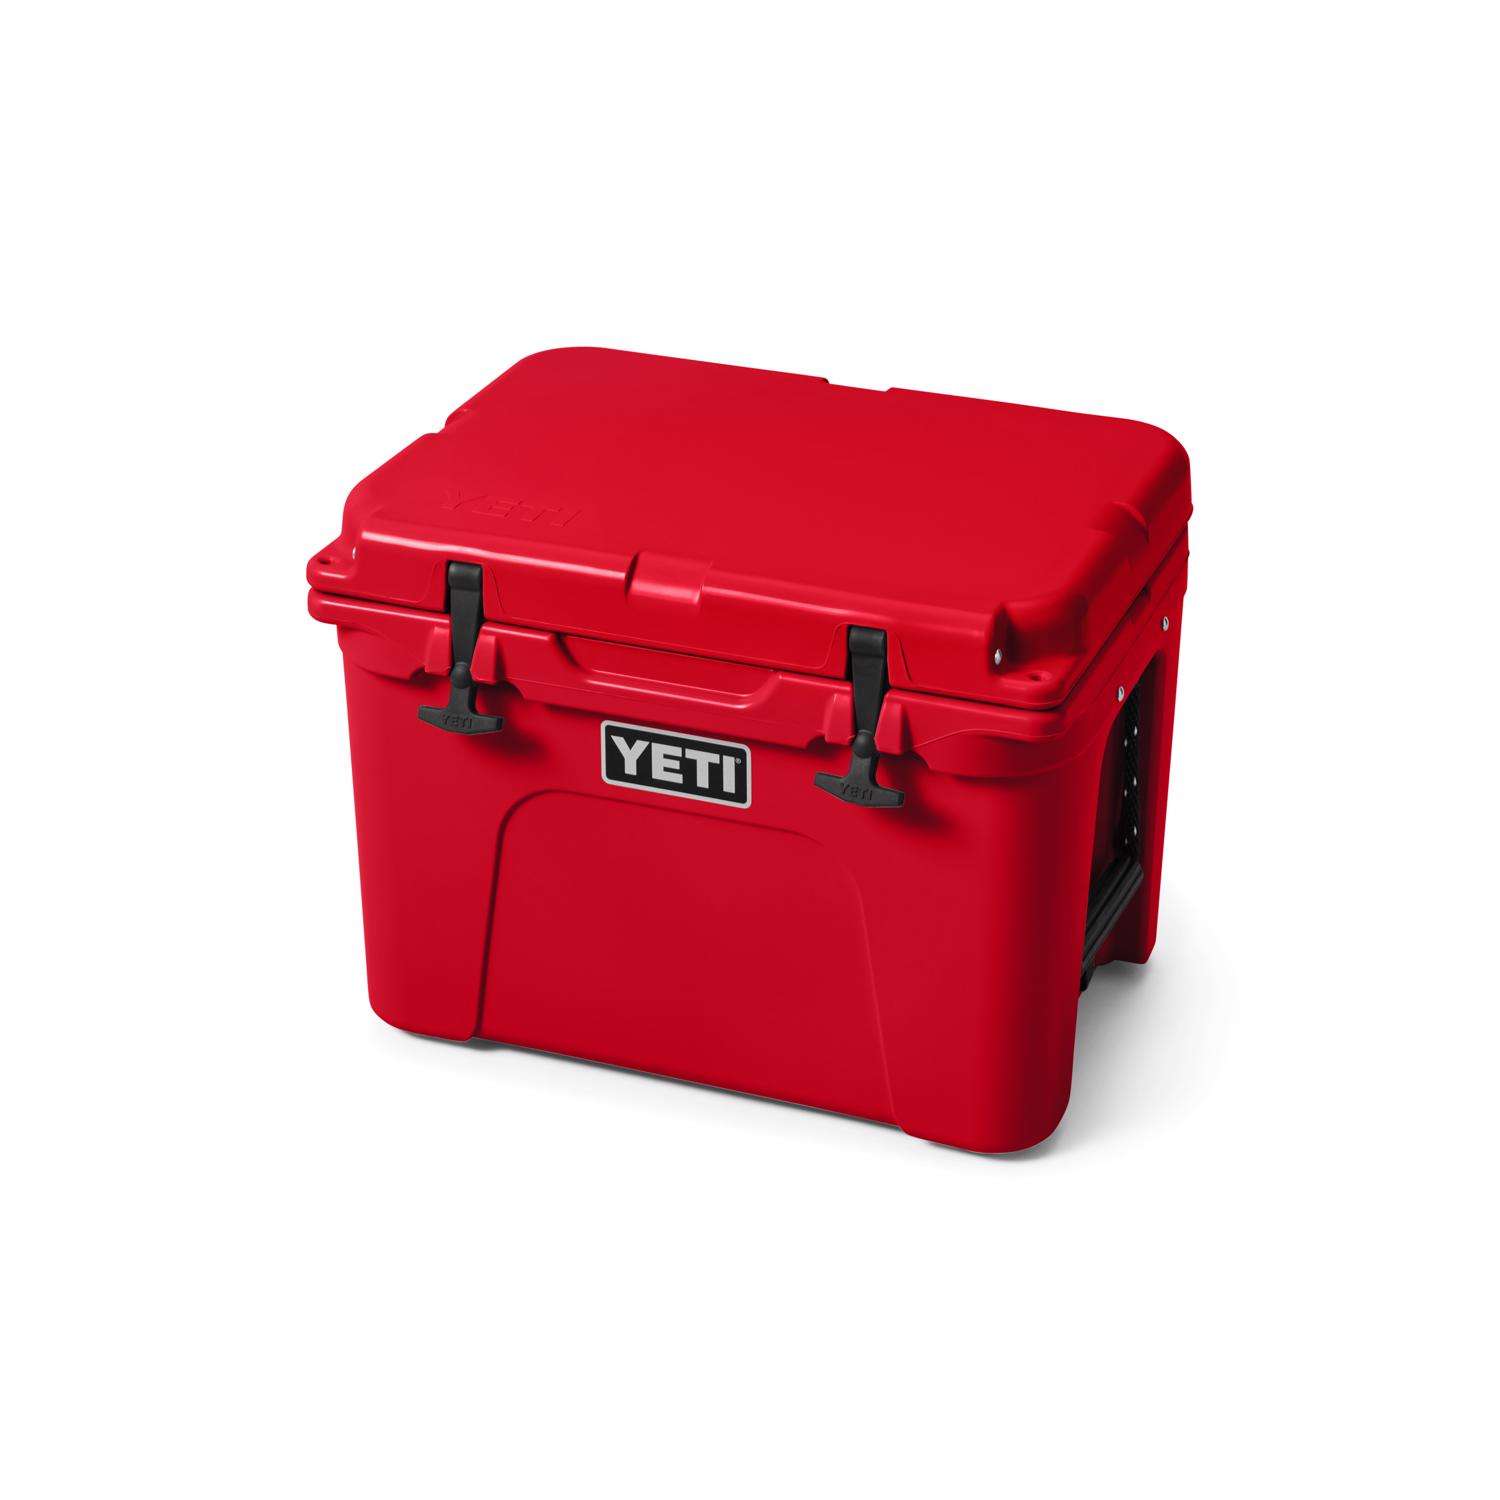 YETI Tundra 35 Rescue Red 24 qt Hard Cooler - Ace Hardware